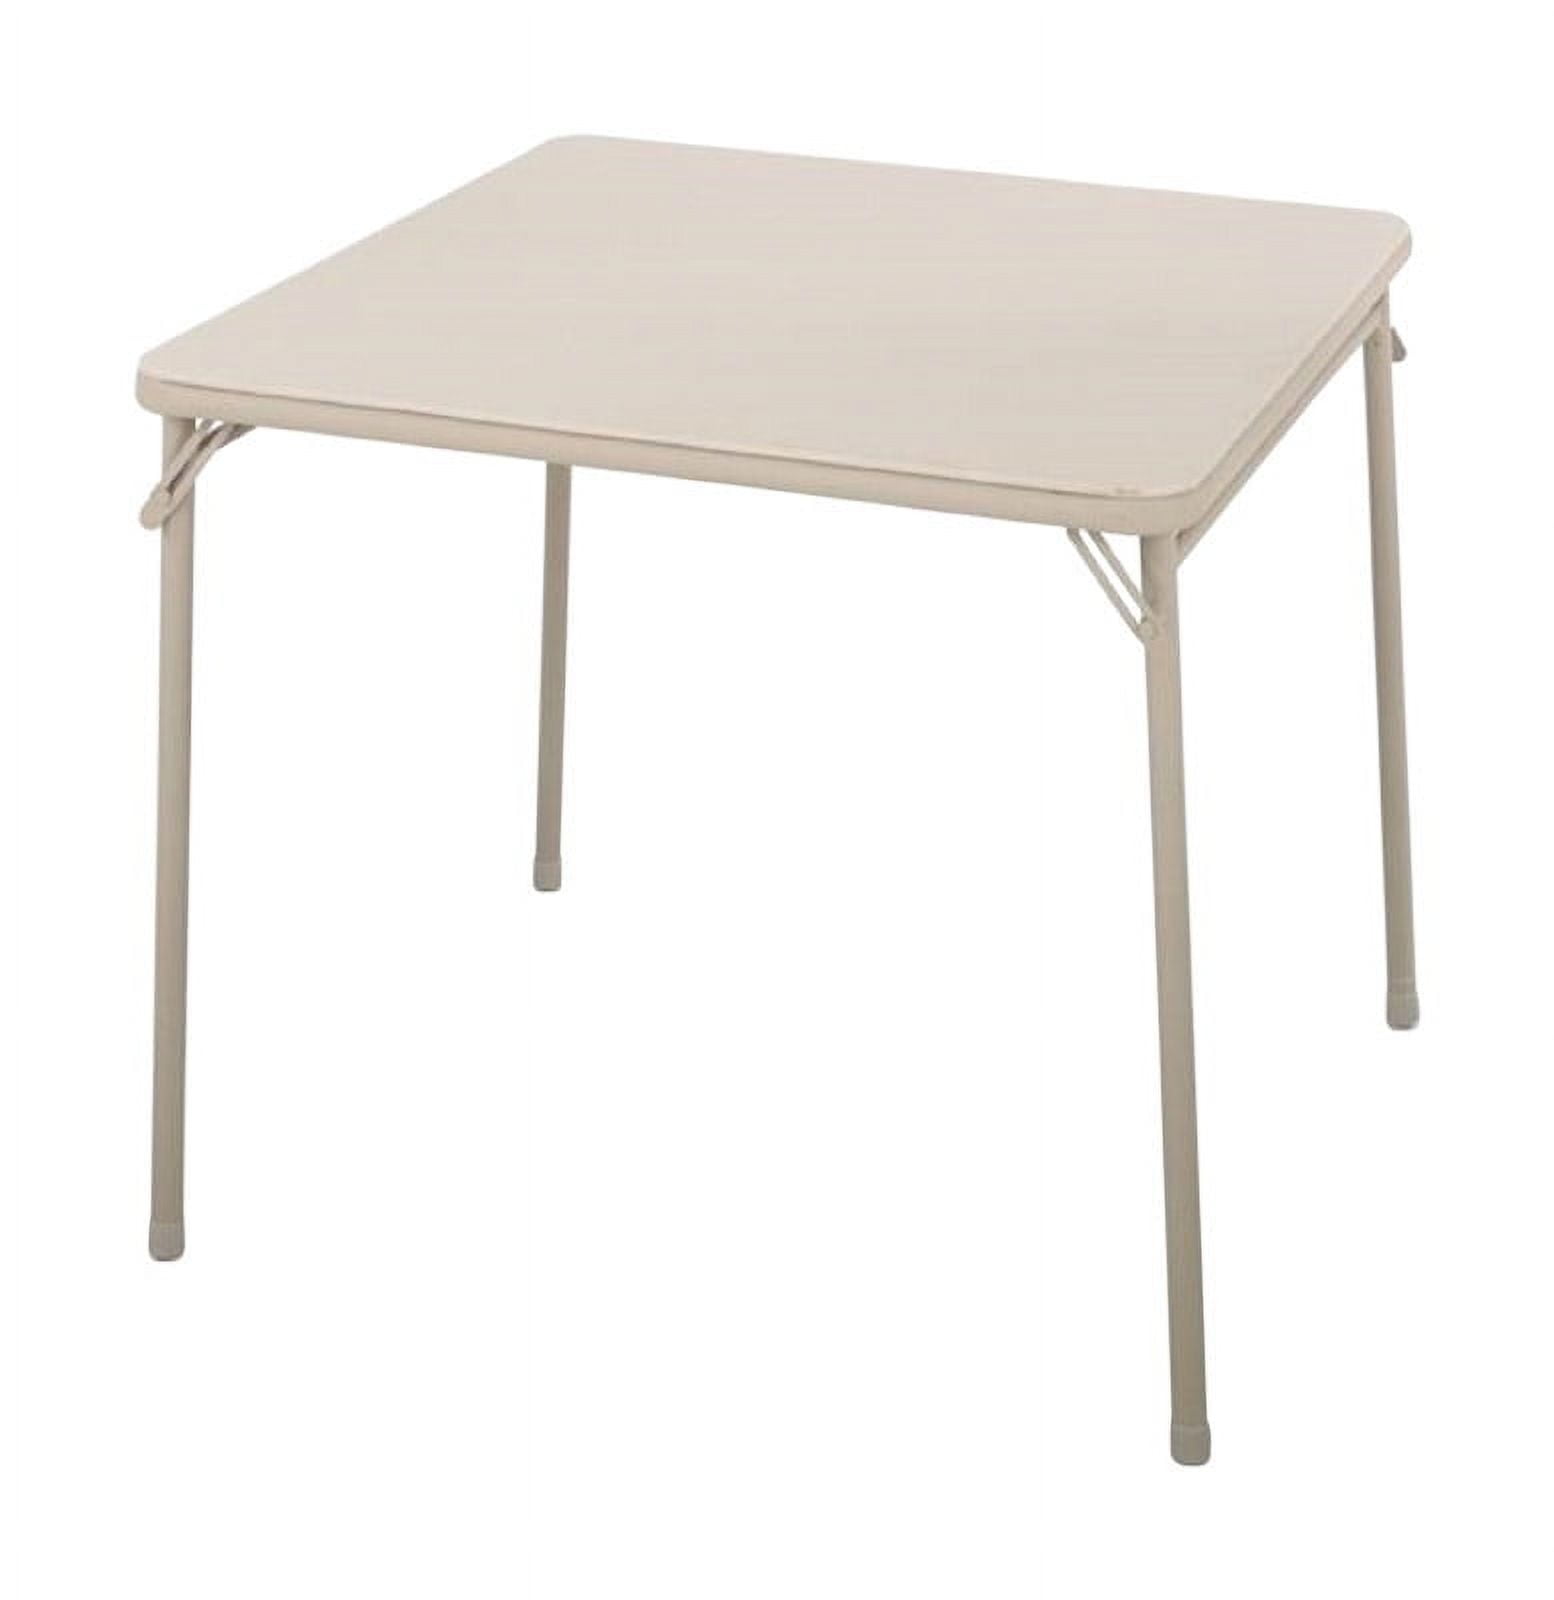 Picture of Ameriwood 8064651 34 in. Folding Table